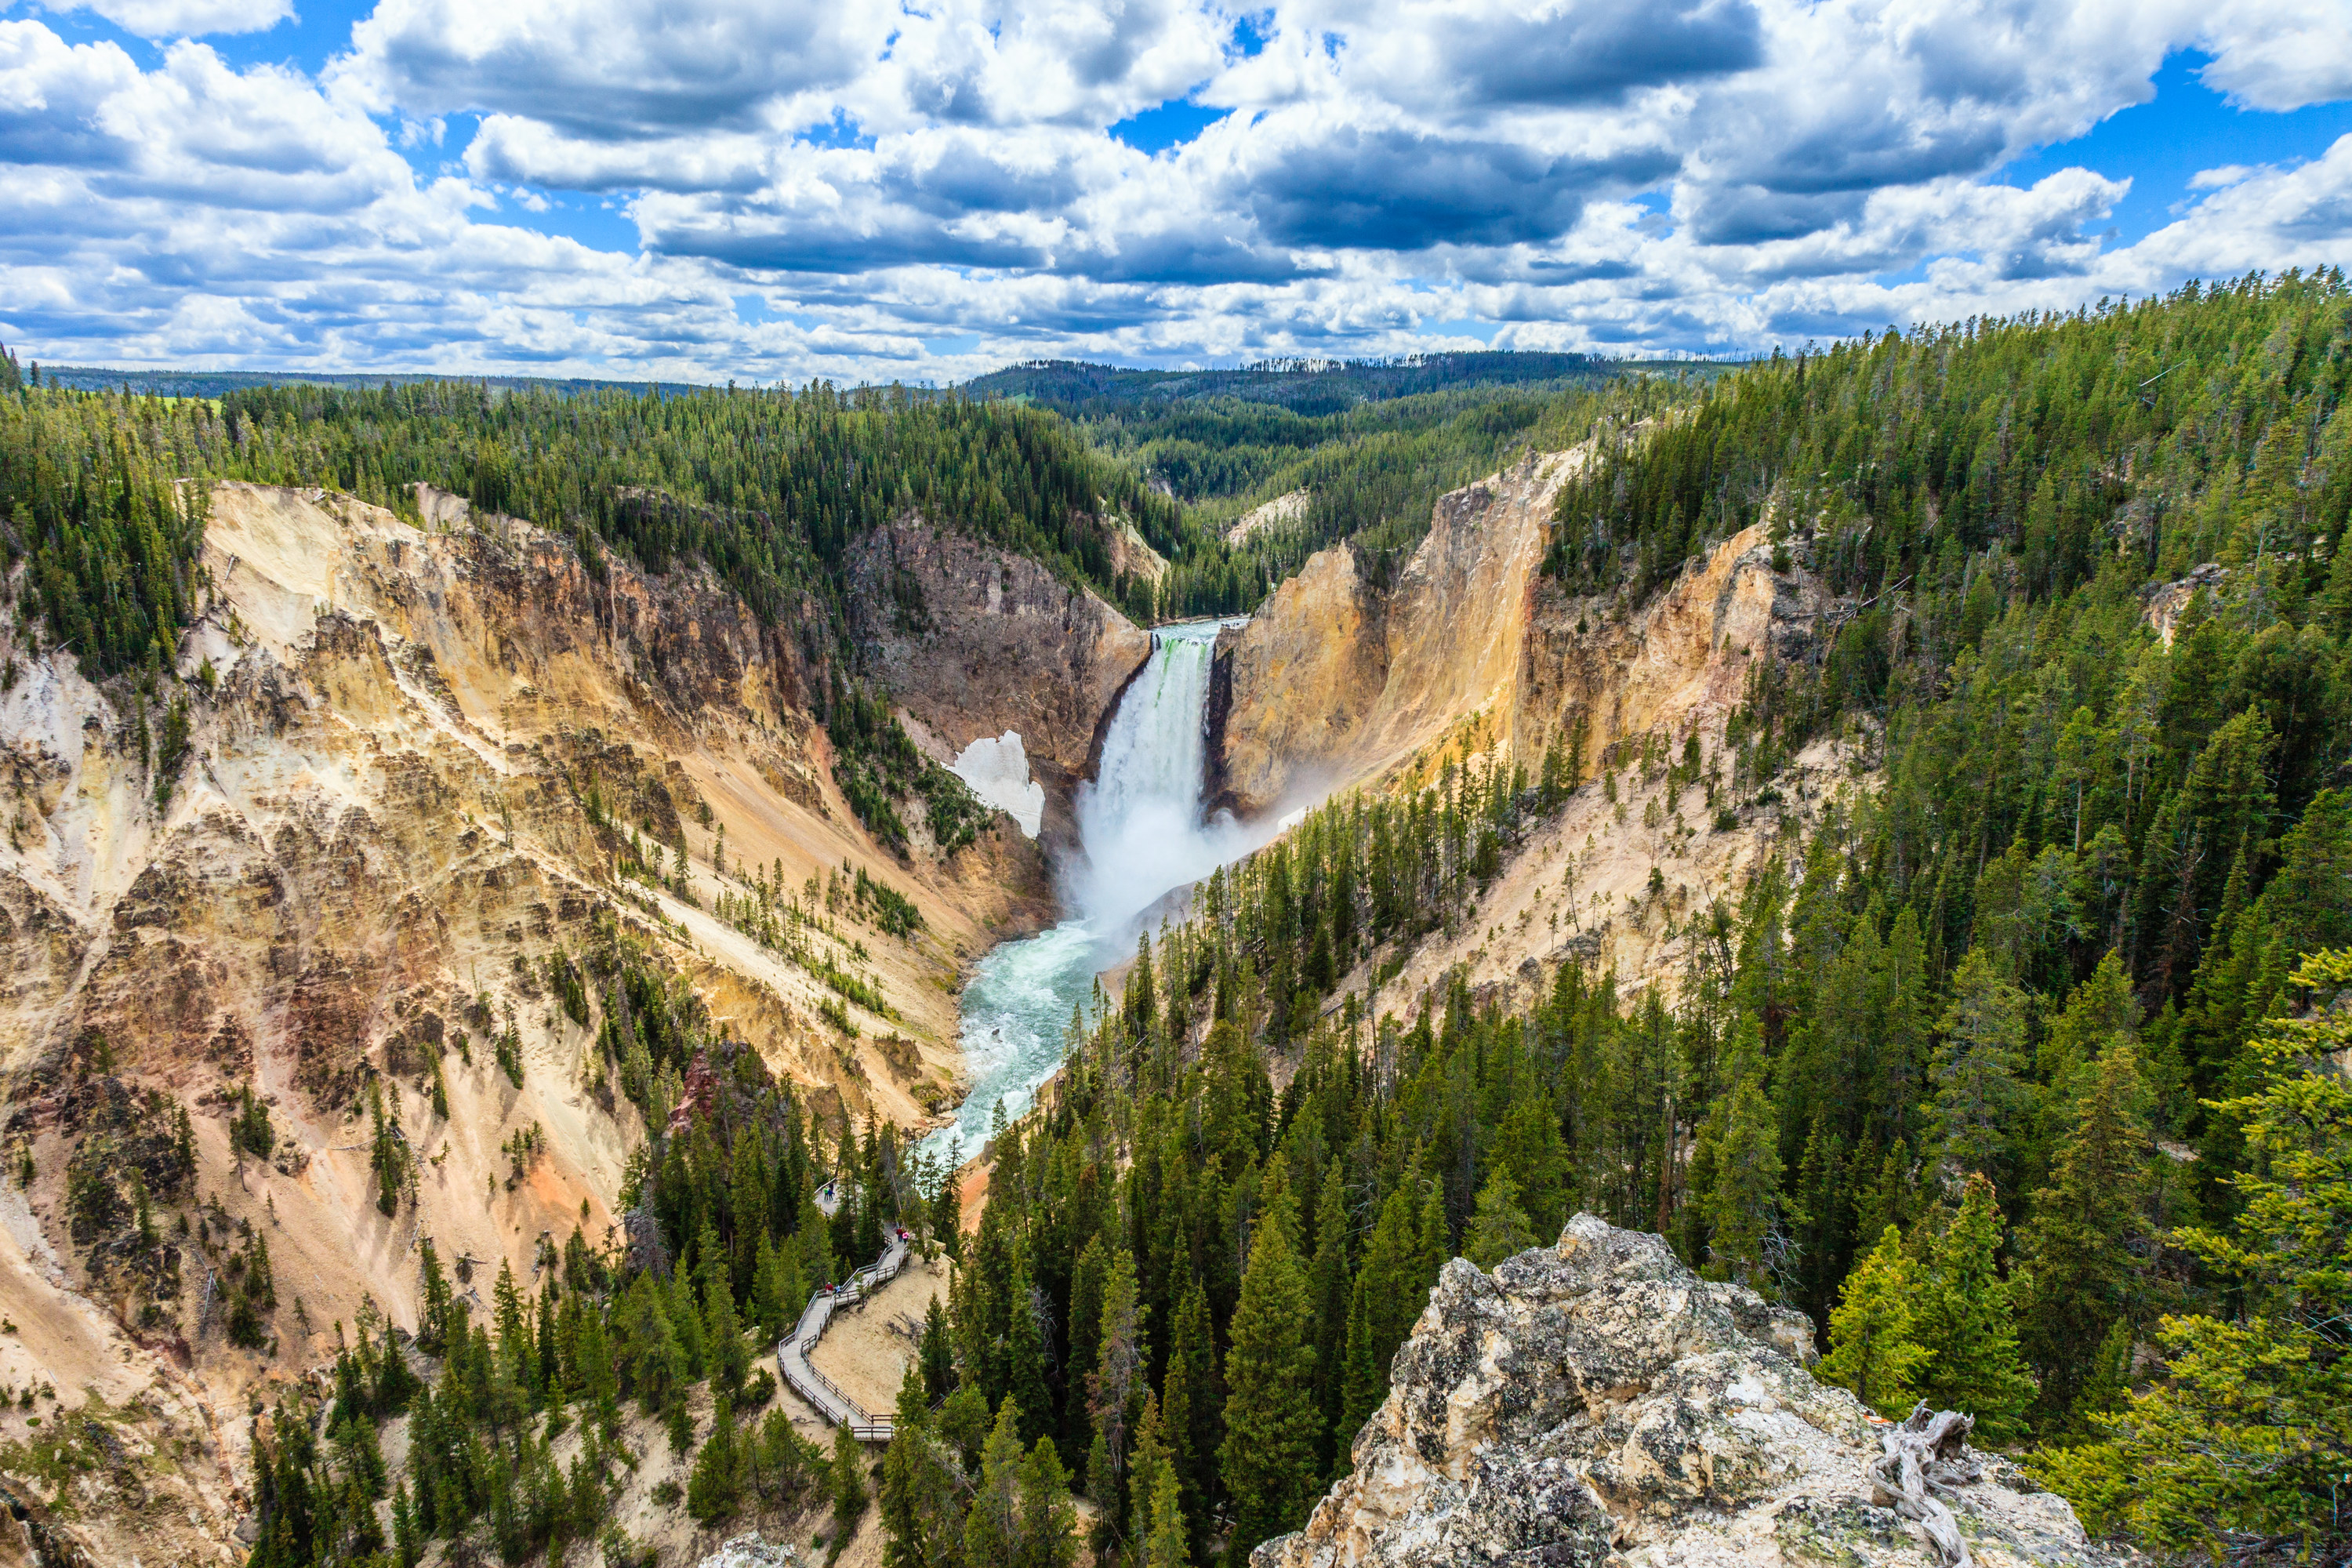 Landscapes from Yellowstone National Park